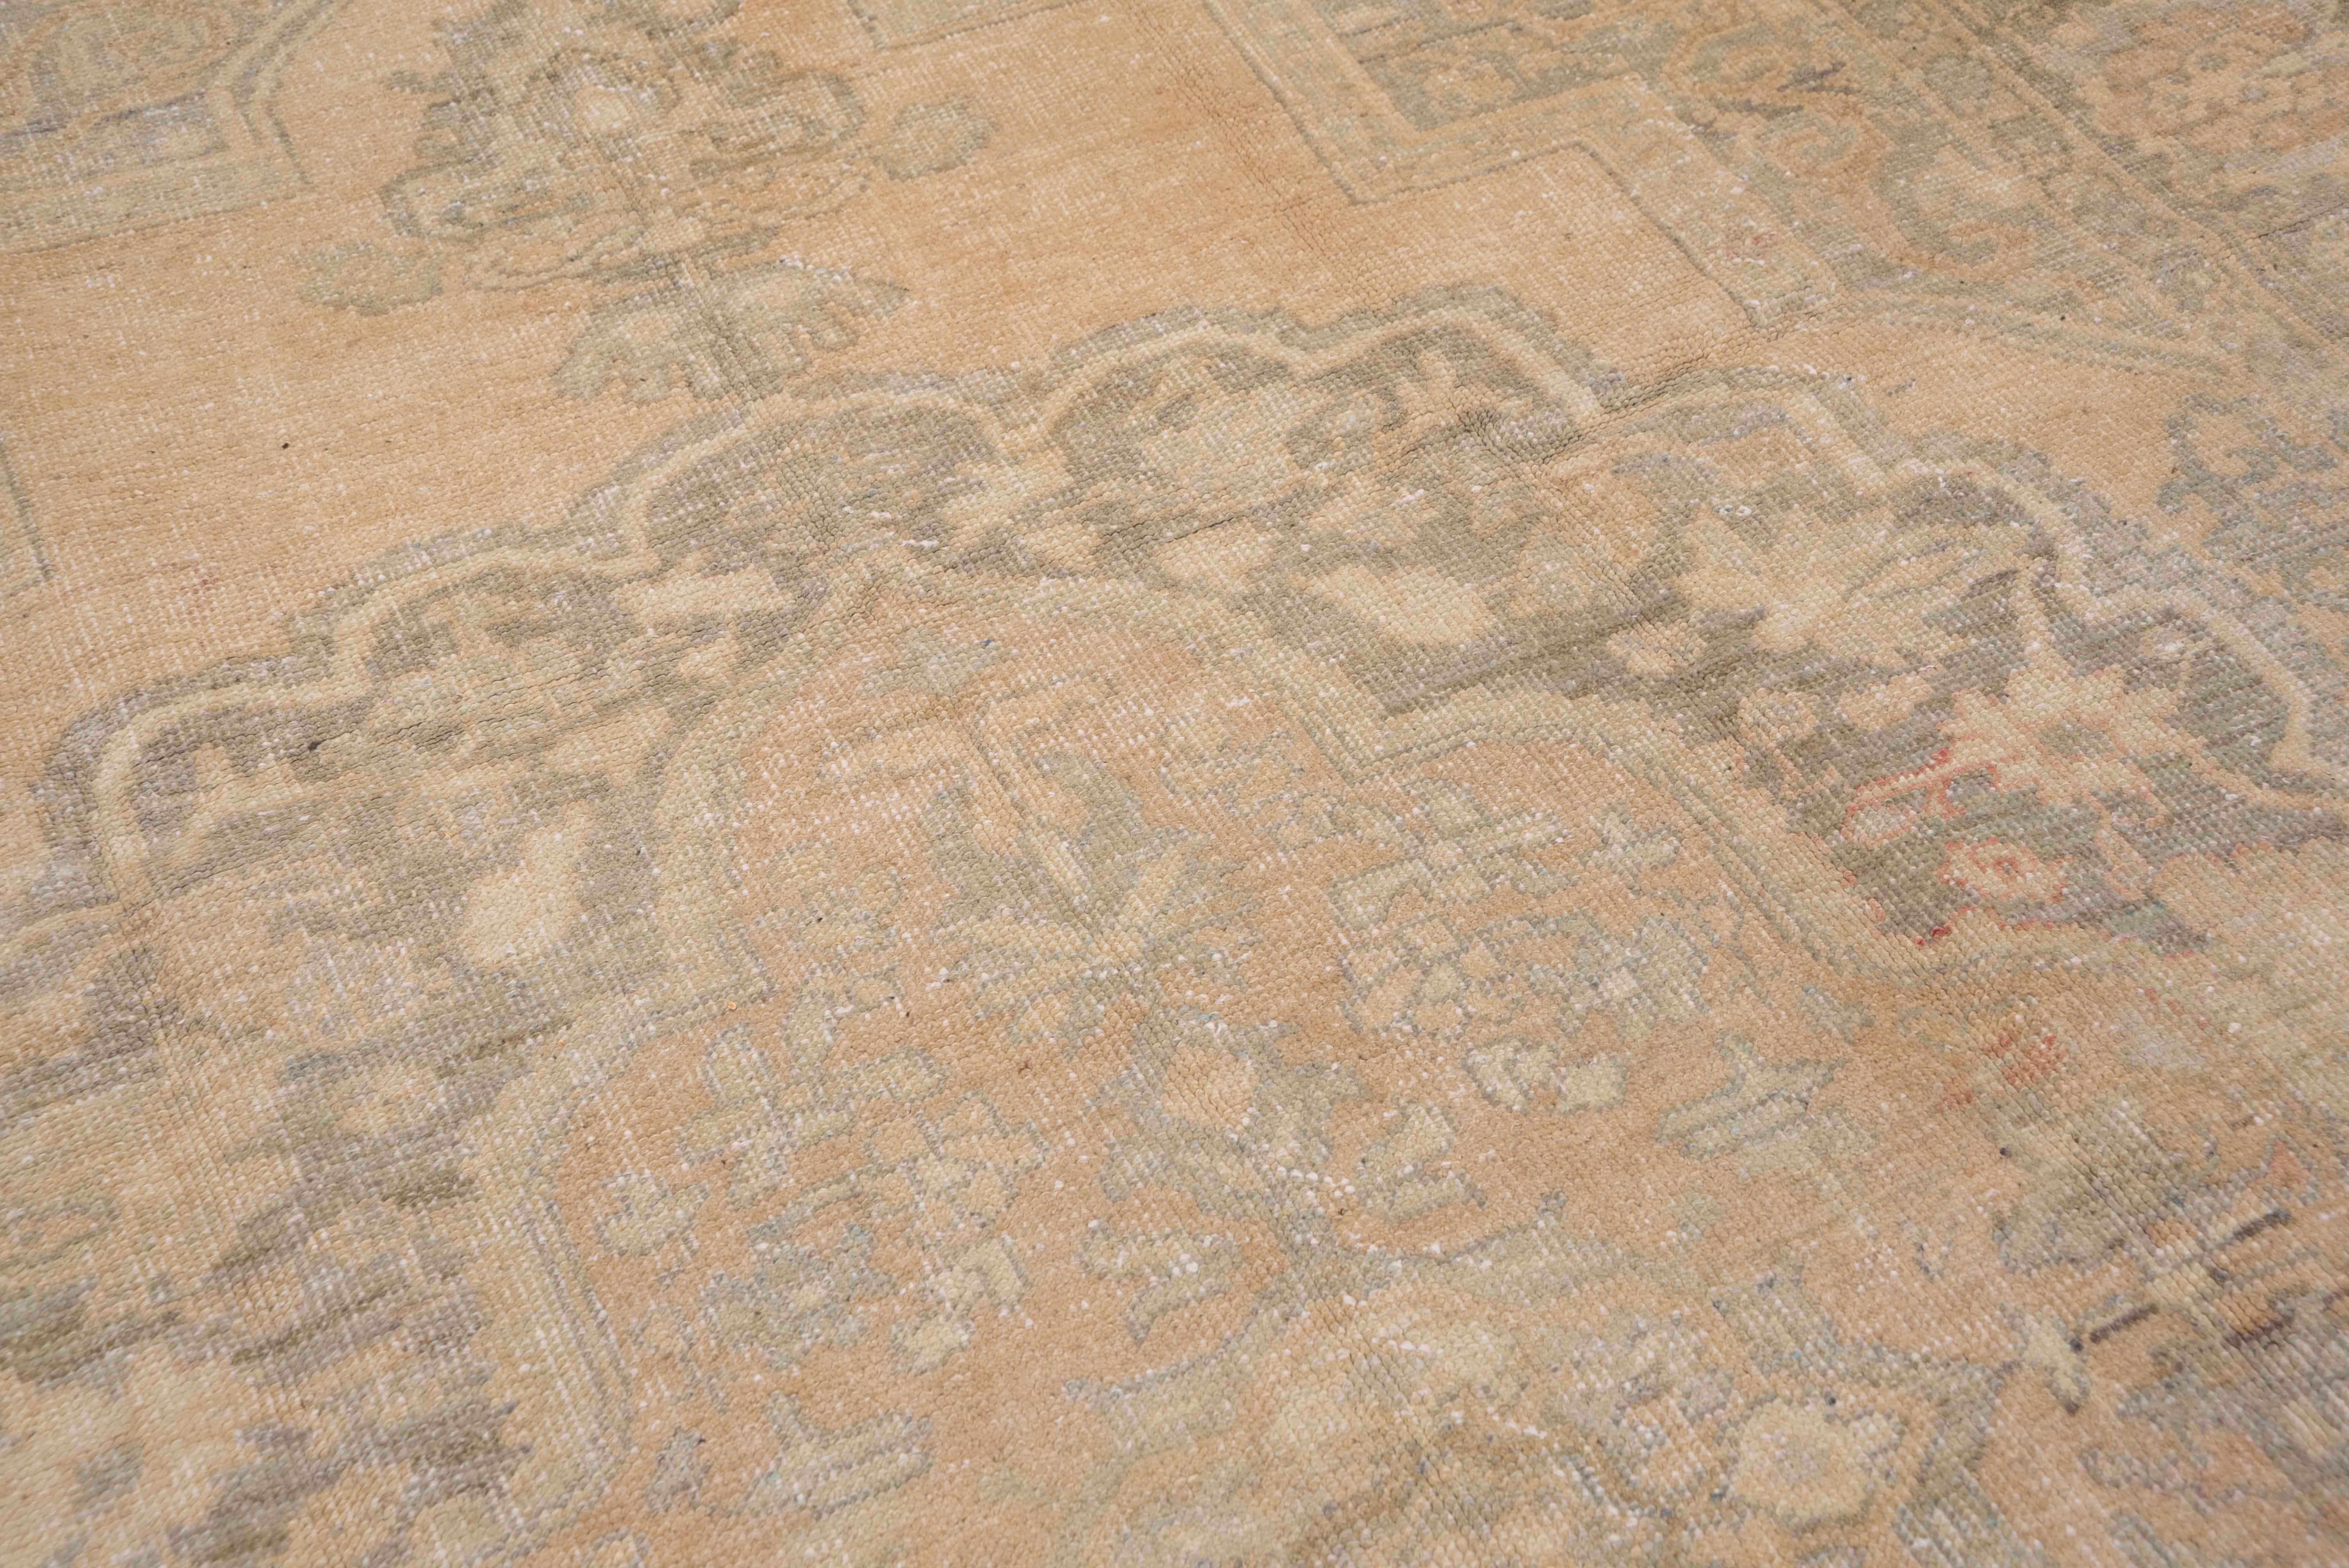 A 28 lobe brownish peach medallion with elaborate palmette pendants is featured on the straw open cartouche-shaped field. The broadly stepped pale grey corners display a light arabesque pattern. The abrashed peach main border displays softly colored